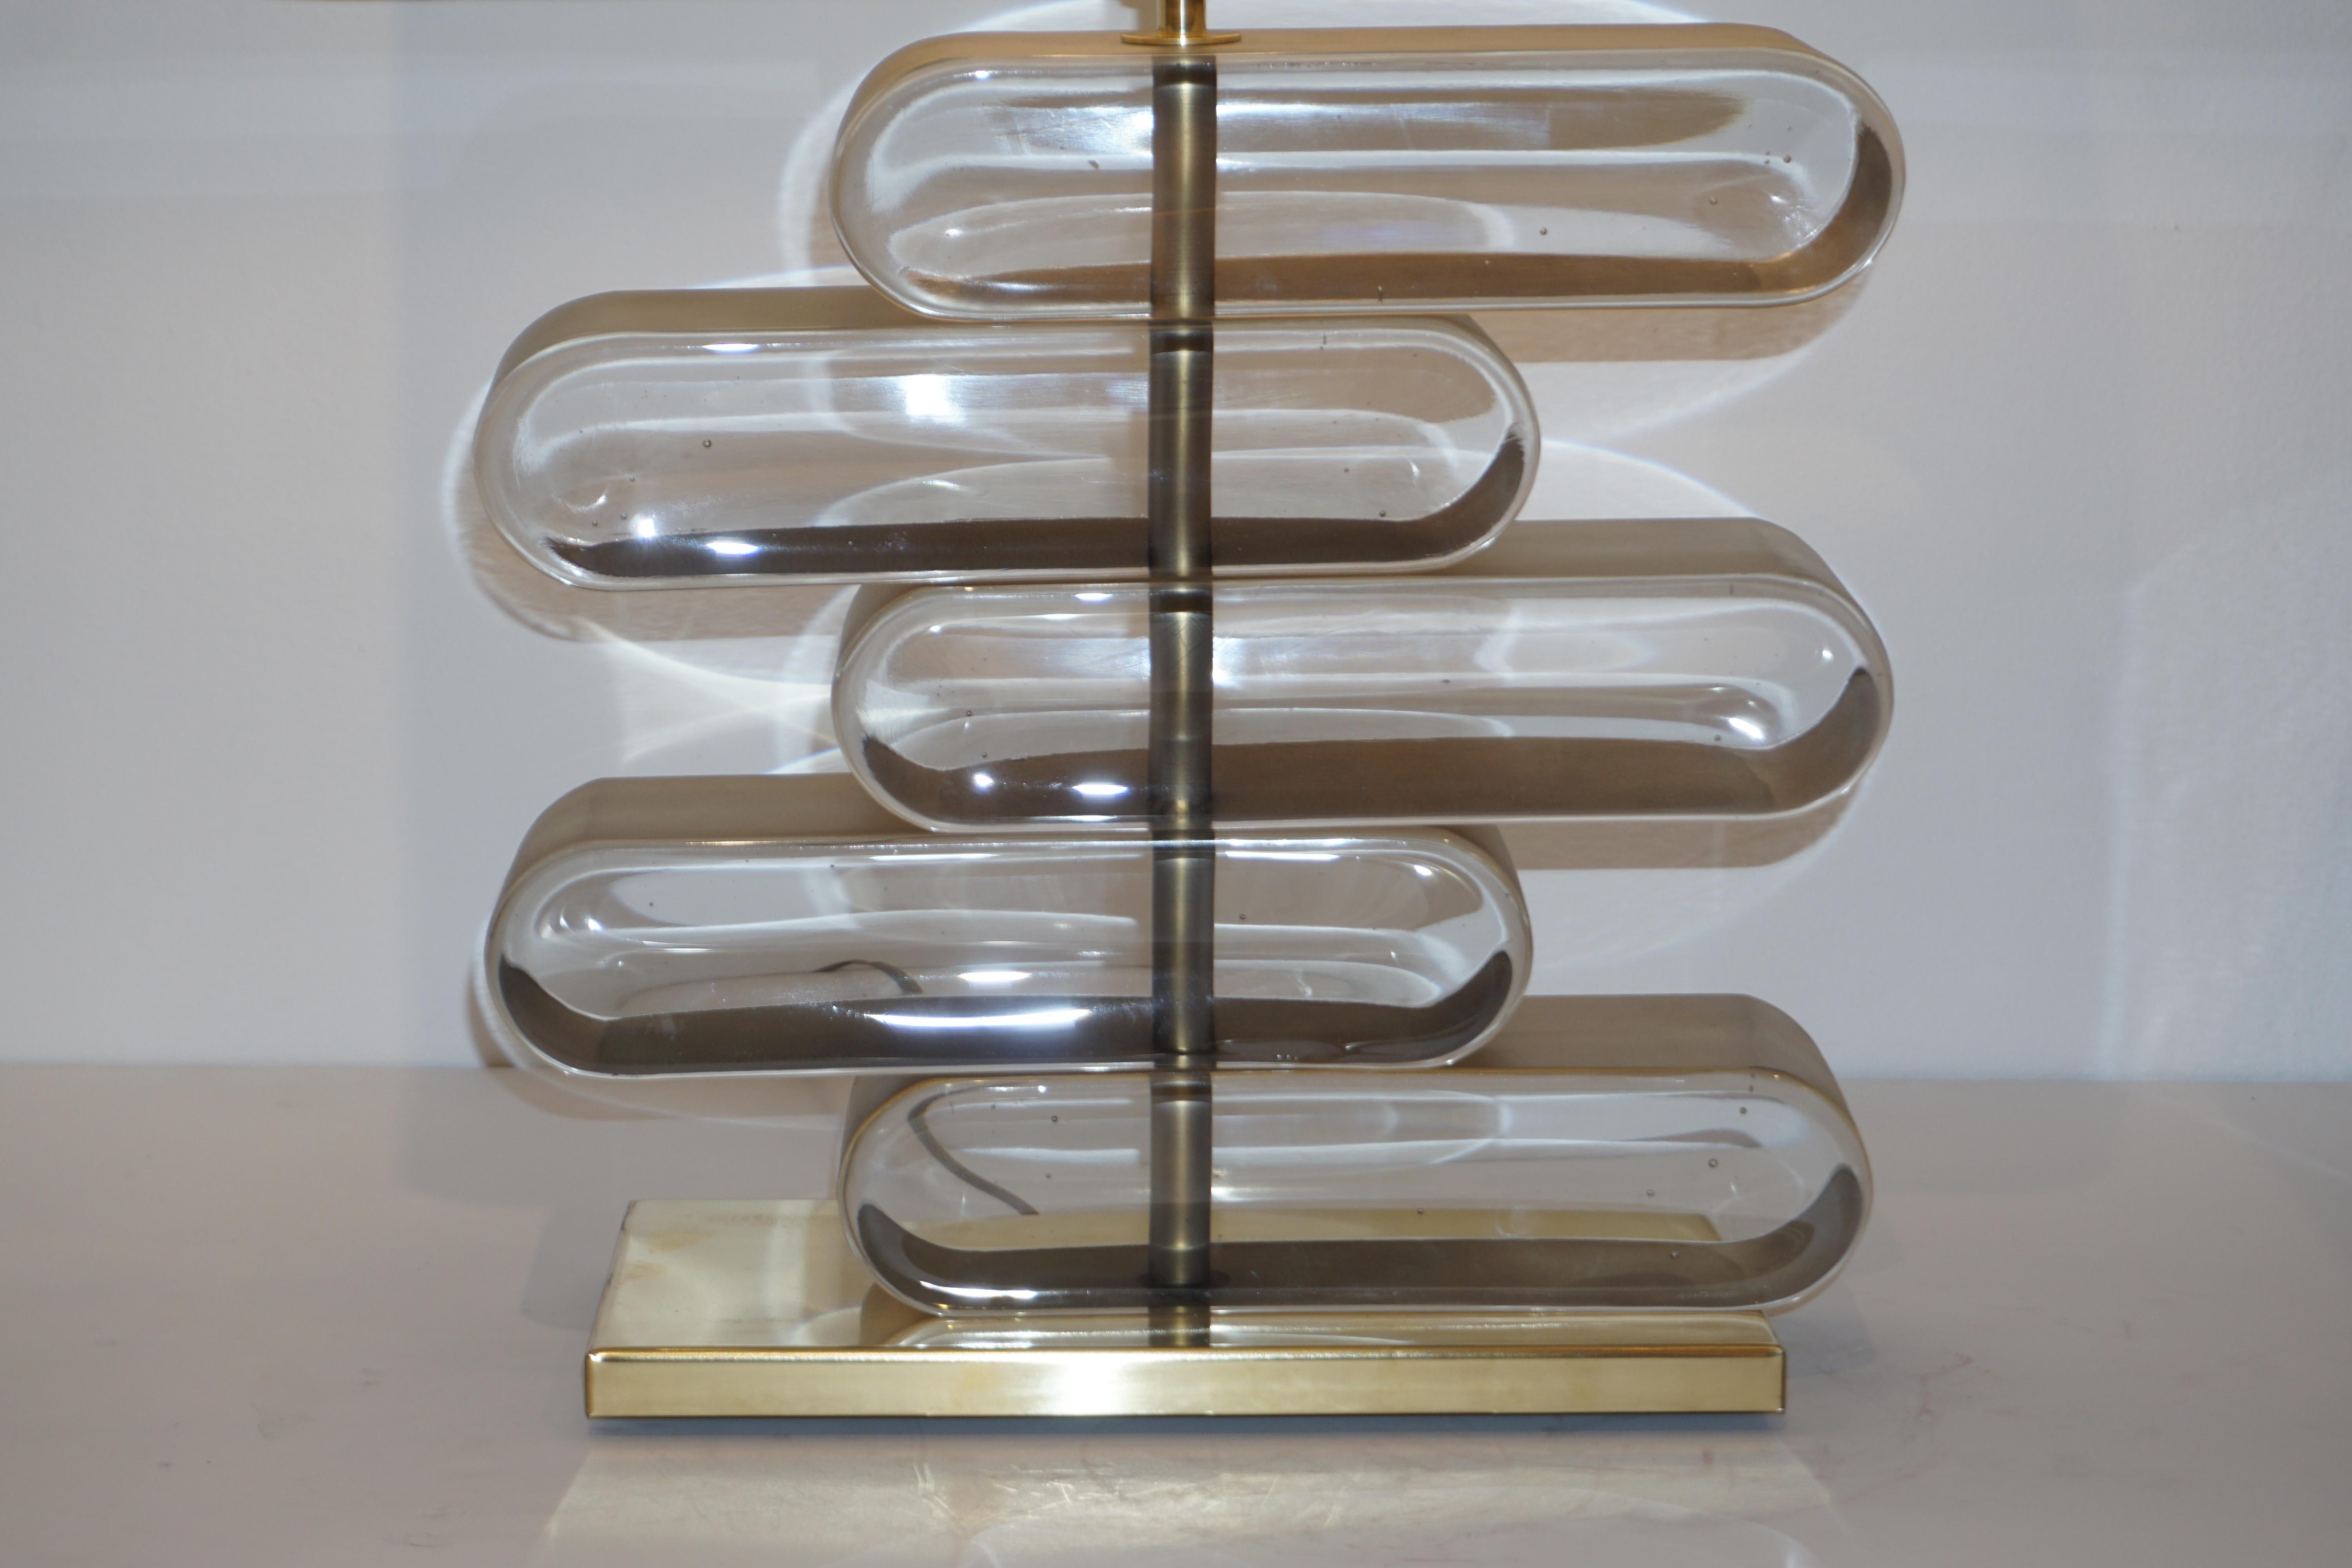 Italian Modern Pair of Brass and Bronze Murano Glass Architectural Table Lamps In New Condition For Sale In New York, NY